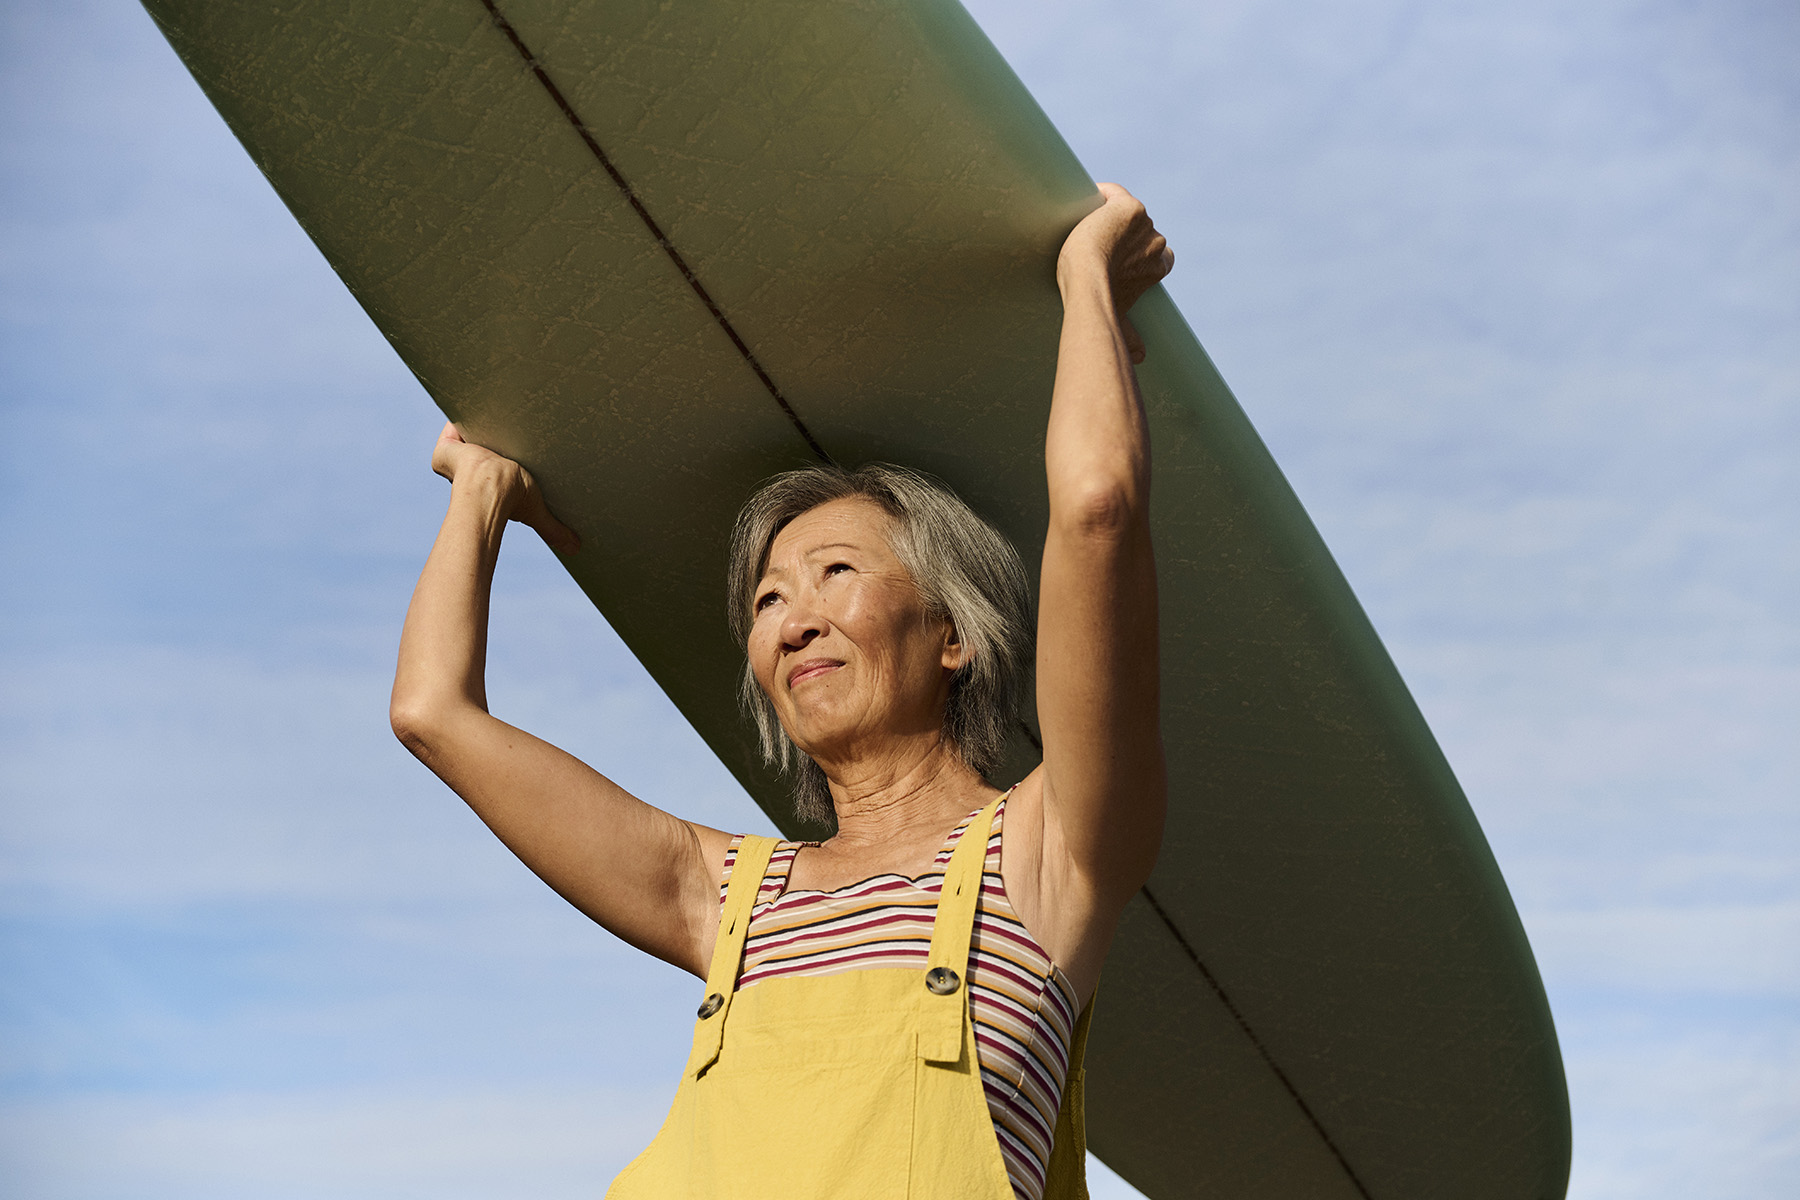 a woman holding a surfboard